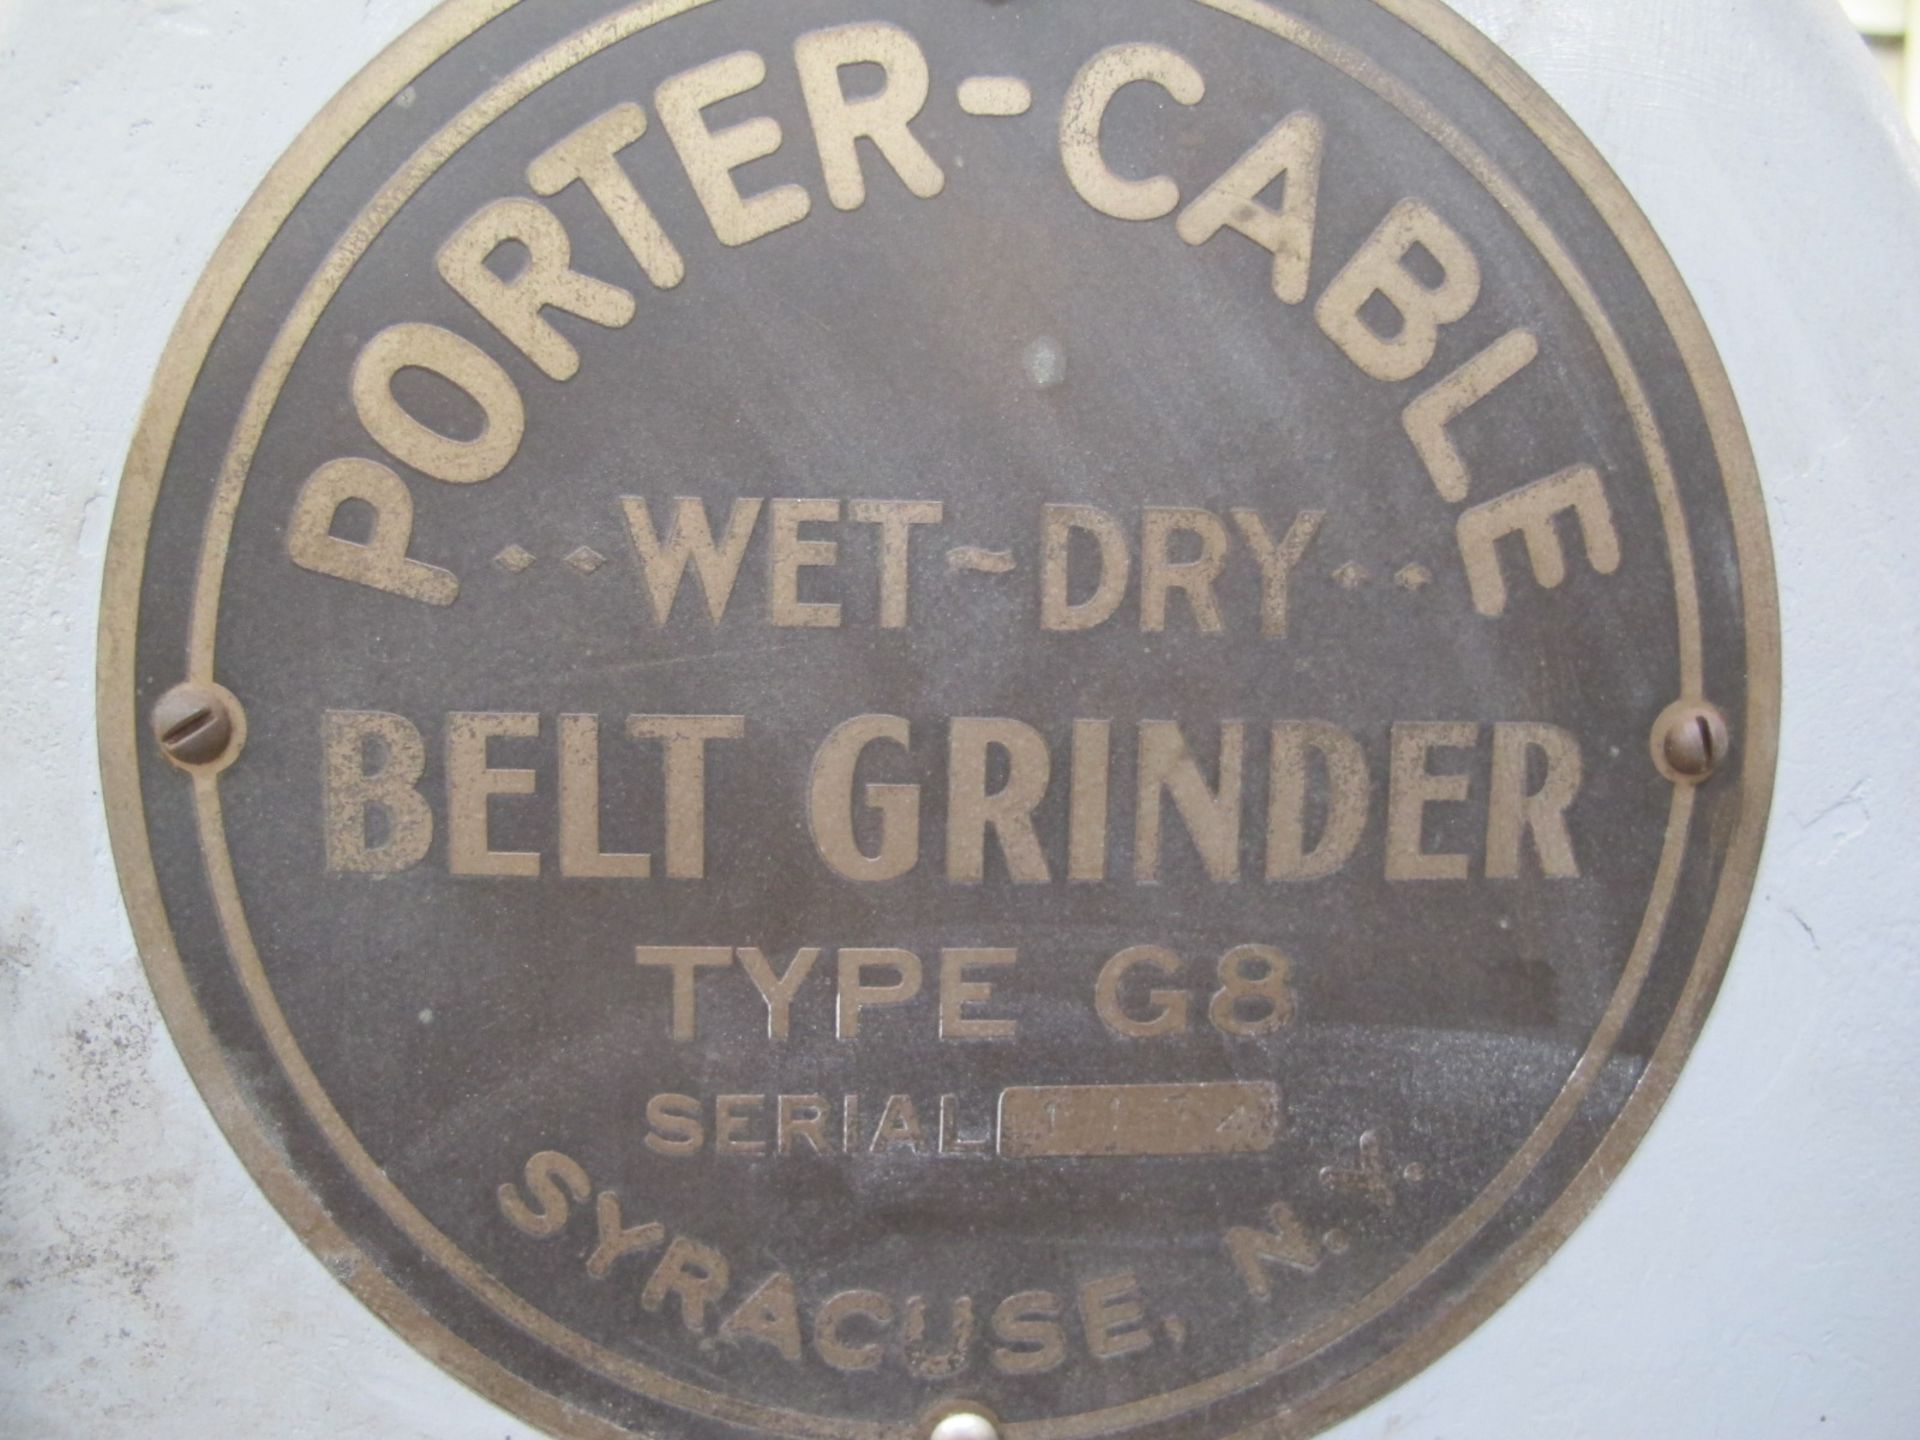 Porter Cable Type G8 8â€ Wet-Dry Belt Sander s/n 1134 - Image 2 of 2